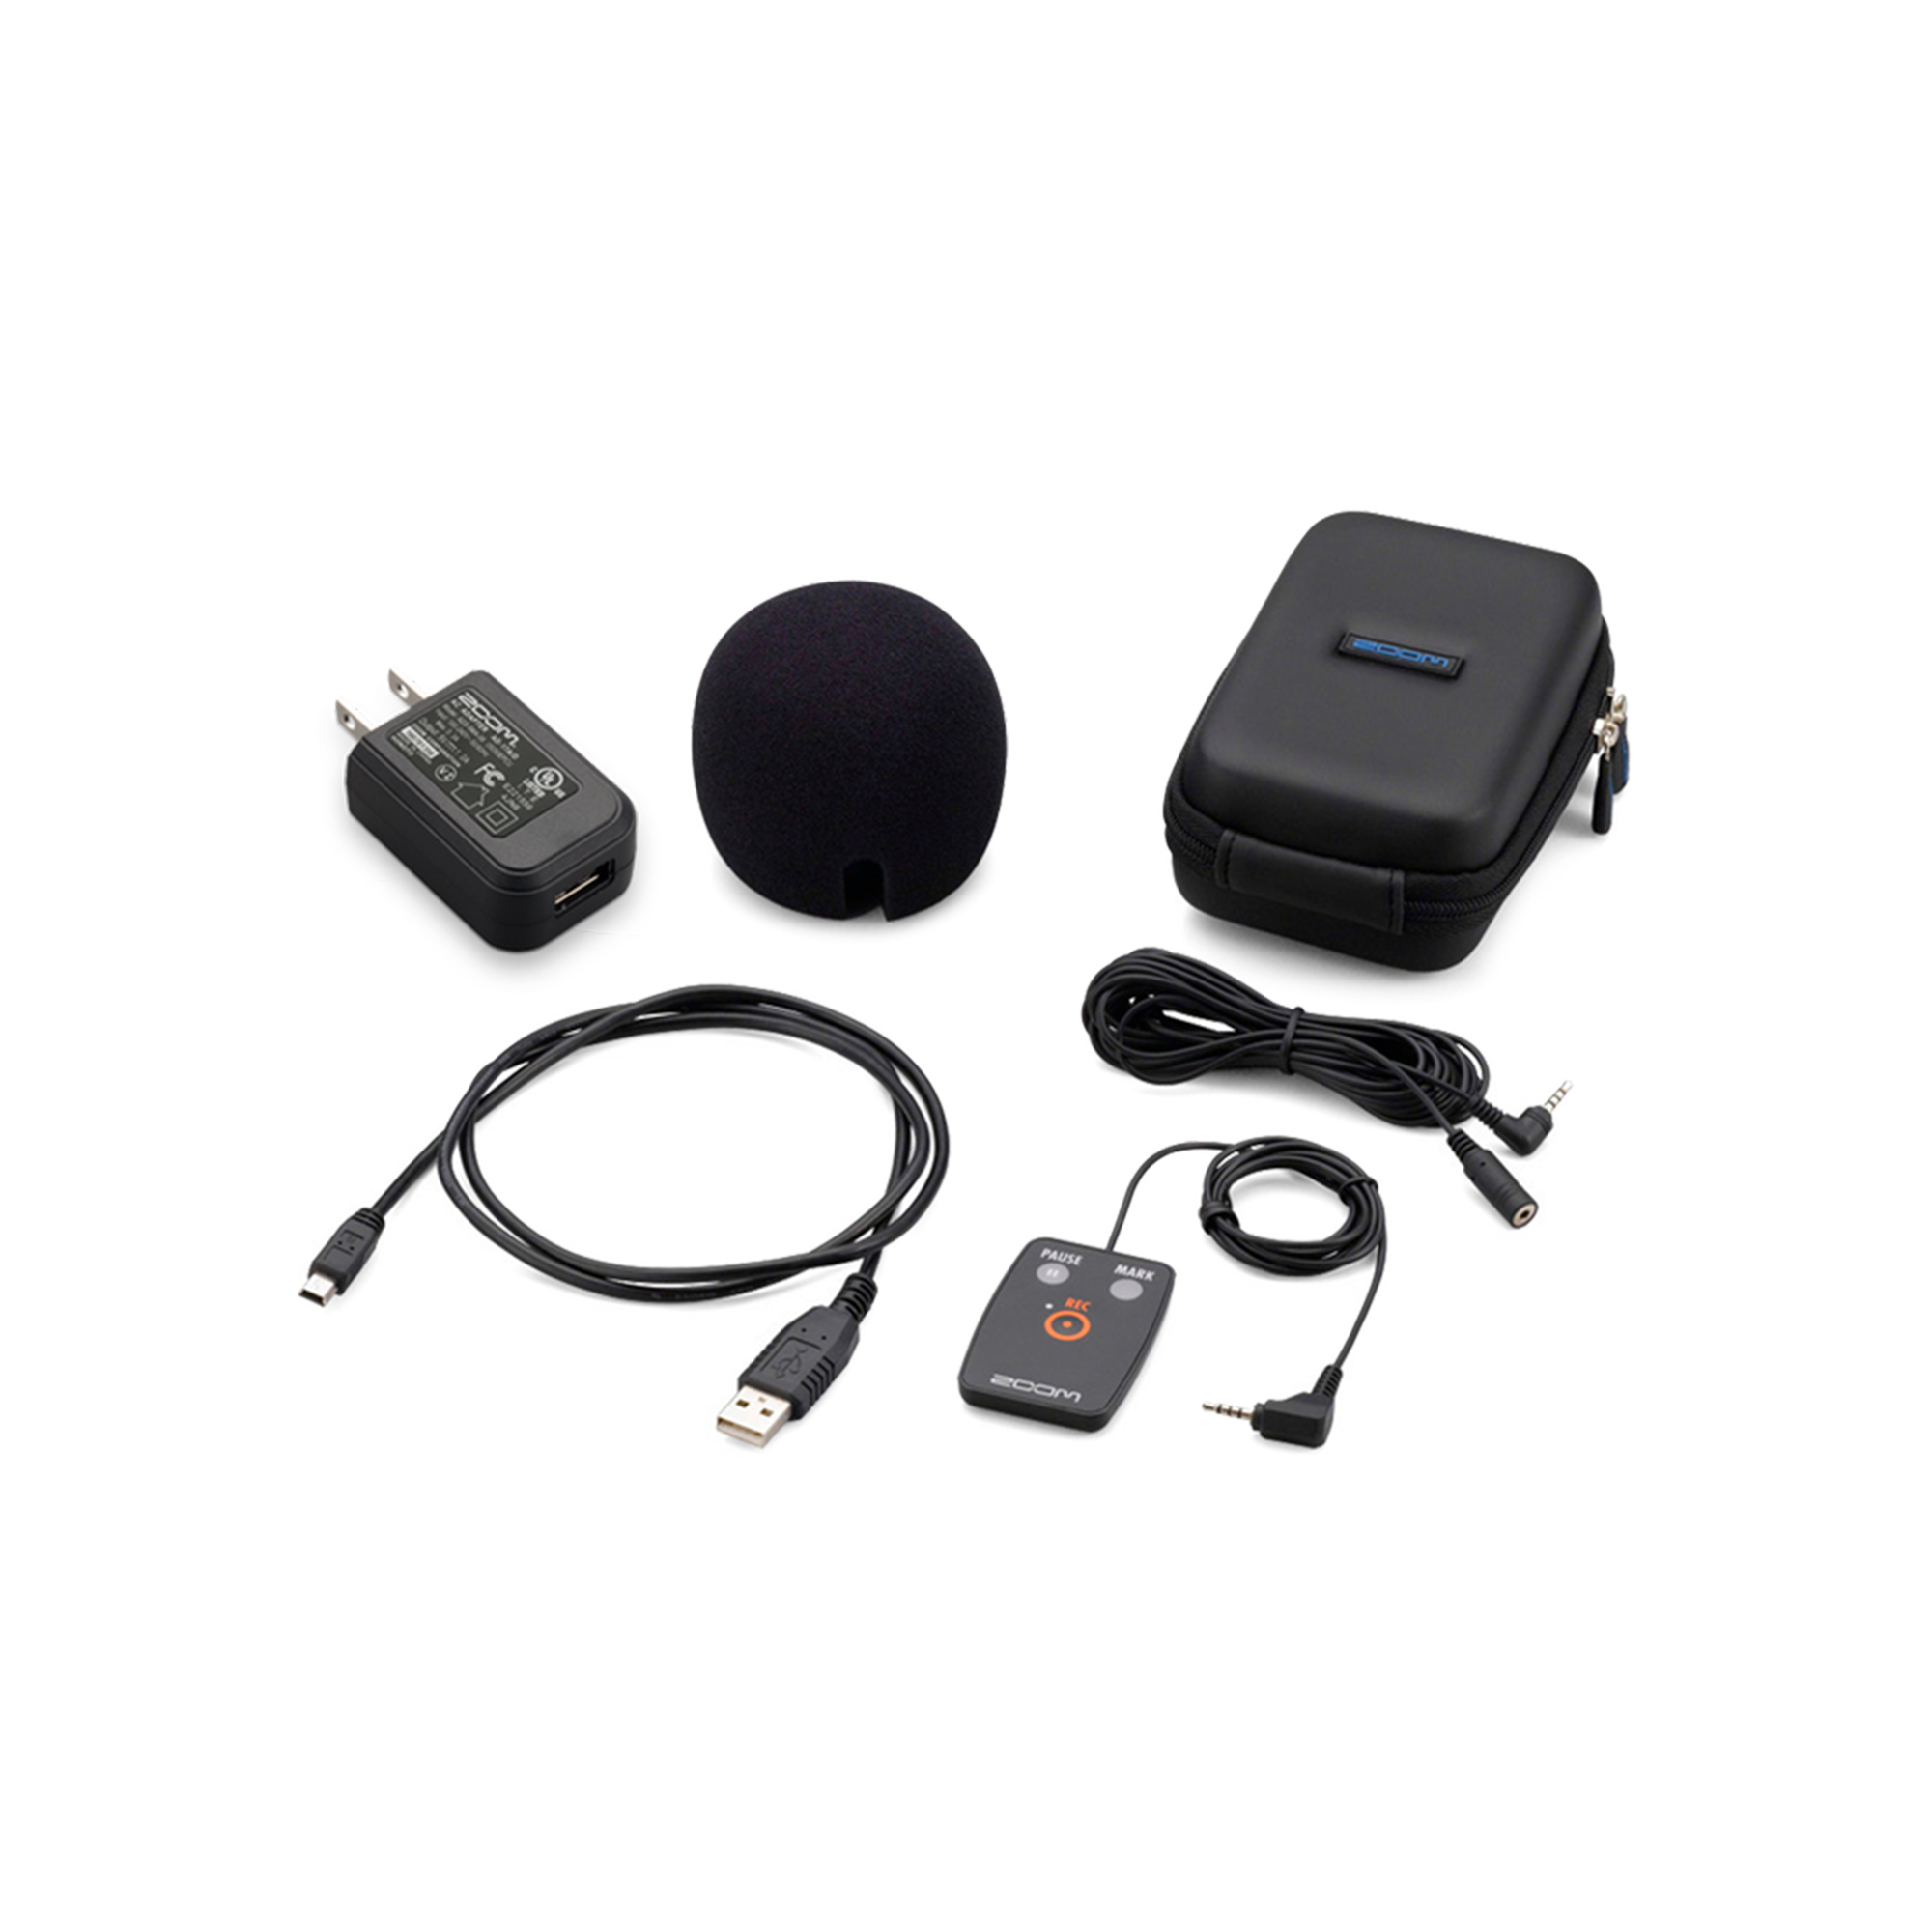 Zoom SPH-2N Accessory Pack for H2n Handy Recorder